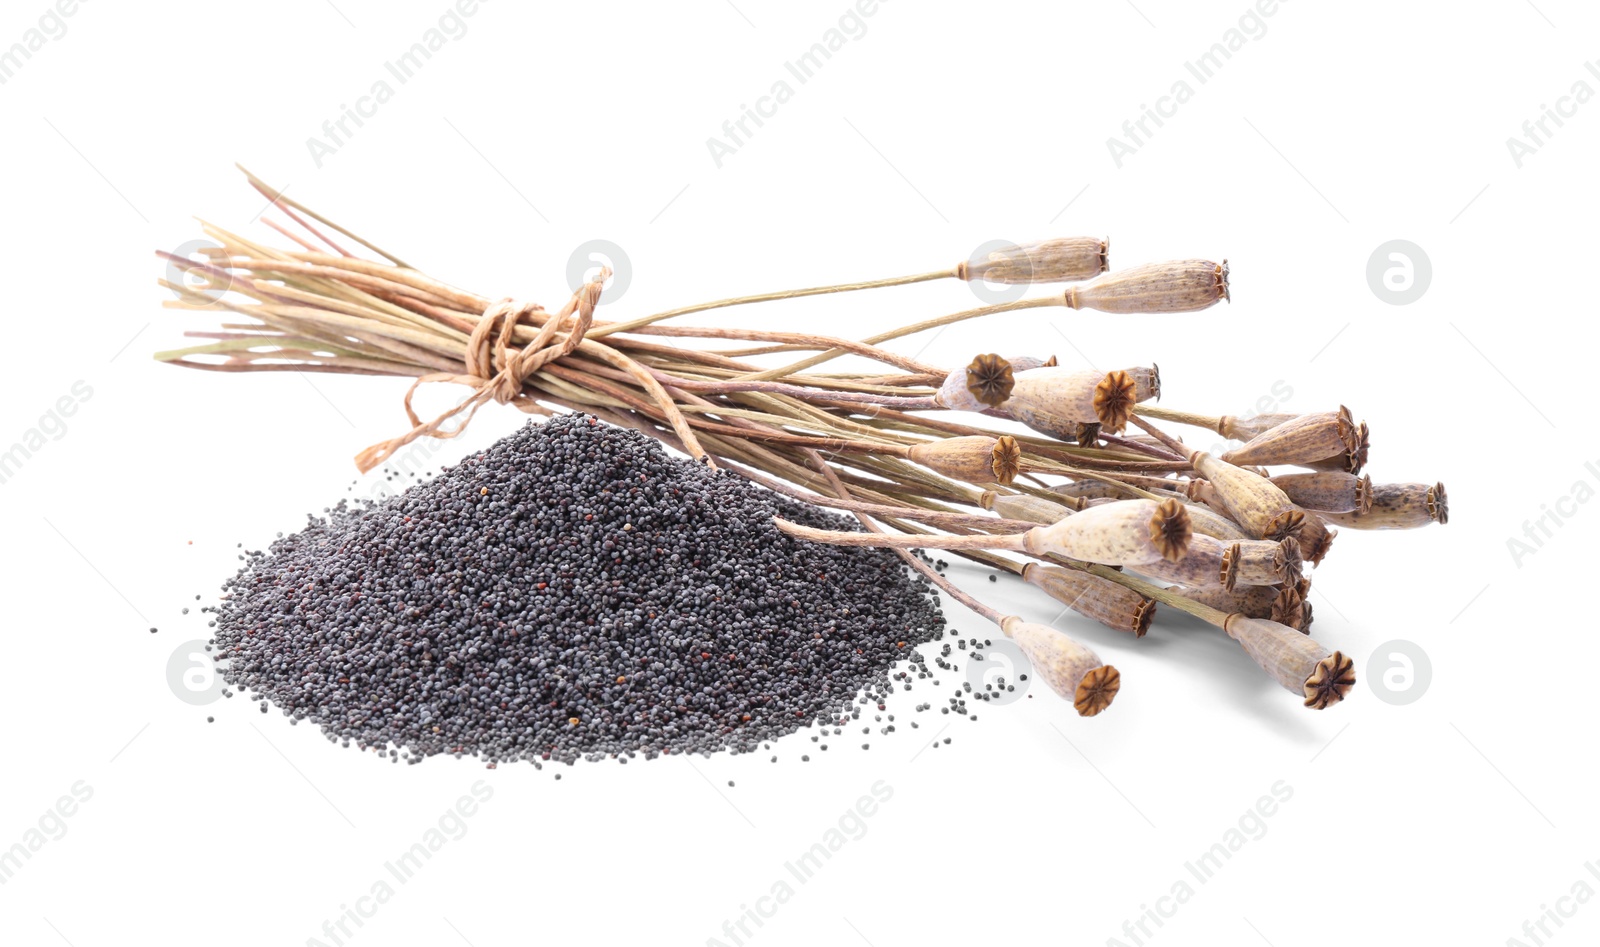 Photo of Dry poppyheads and pile of seeds on white background